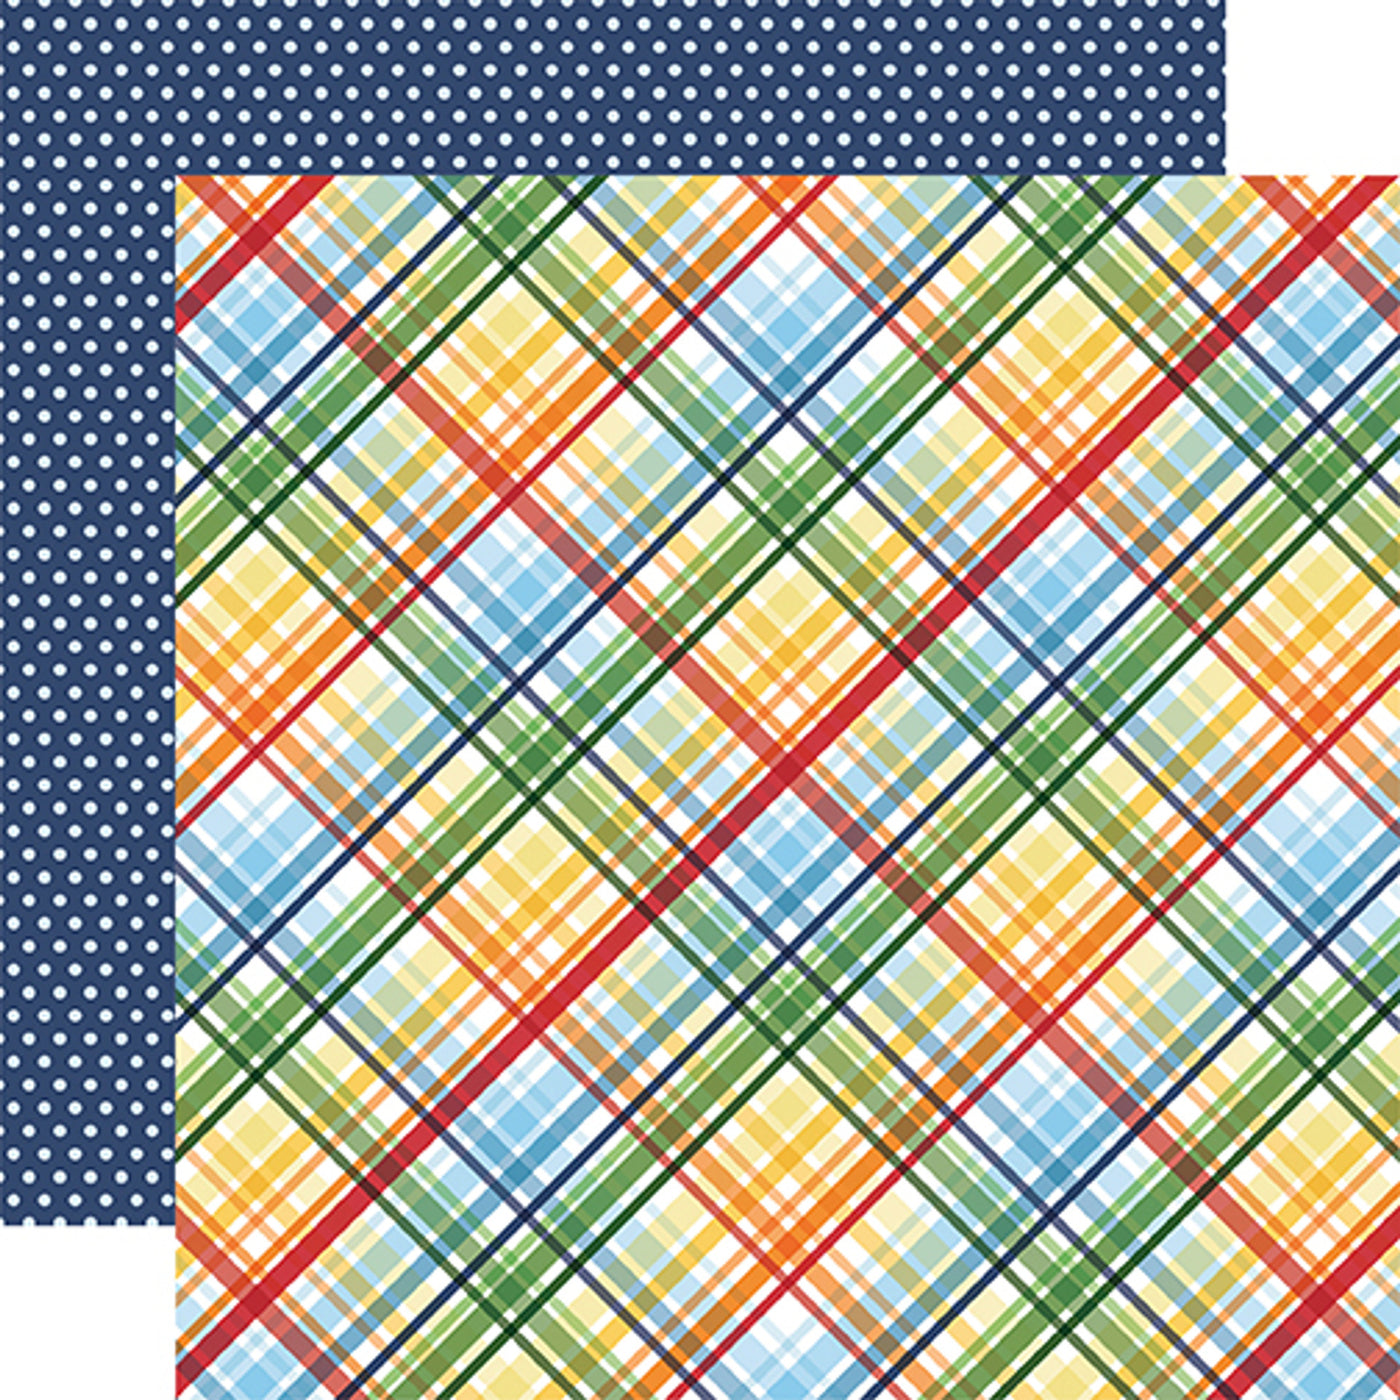 (Side A - plaid in yellow, green, blue, and orange on a white background; Side B - rows of white polka dots on a navy blue background) - from Echo Park Paper.